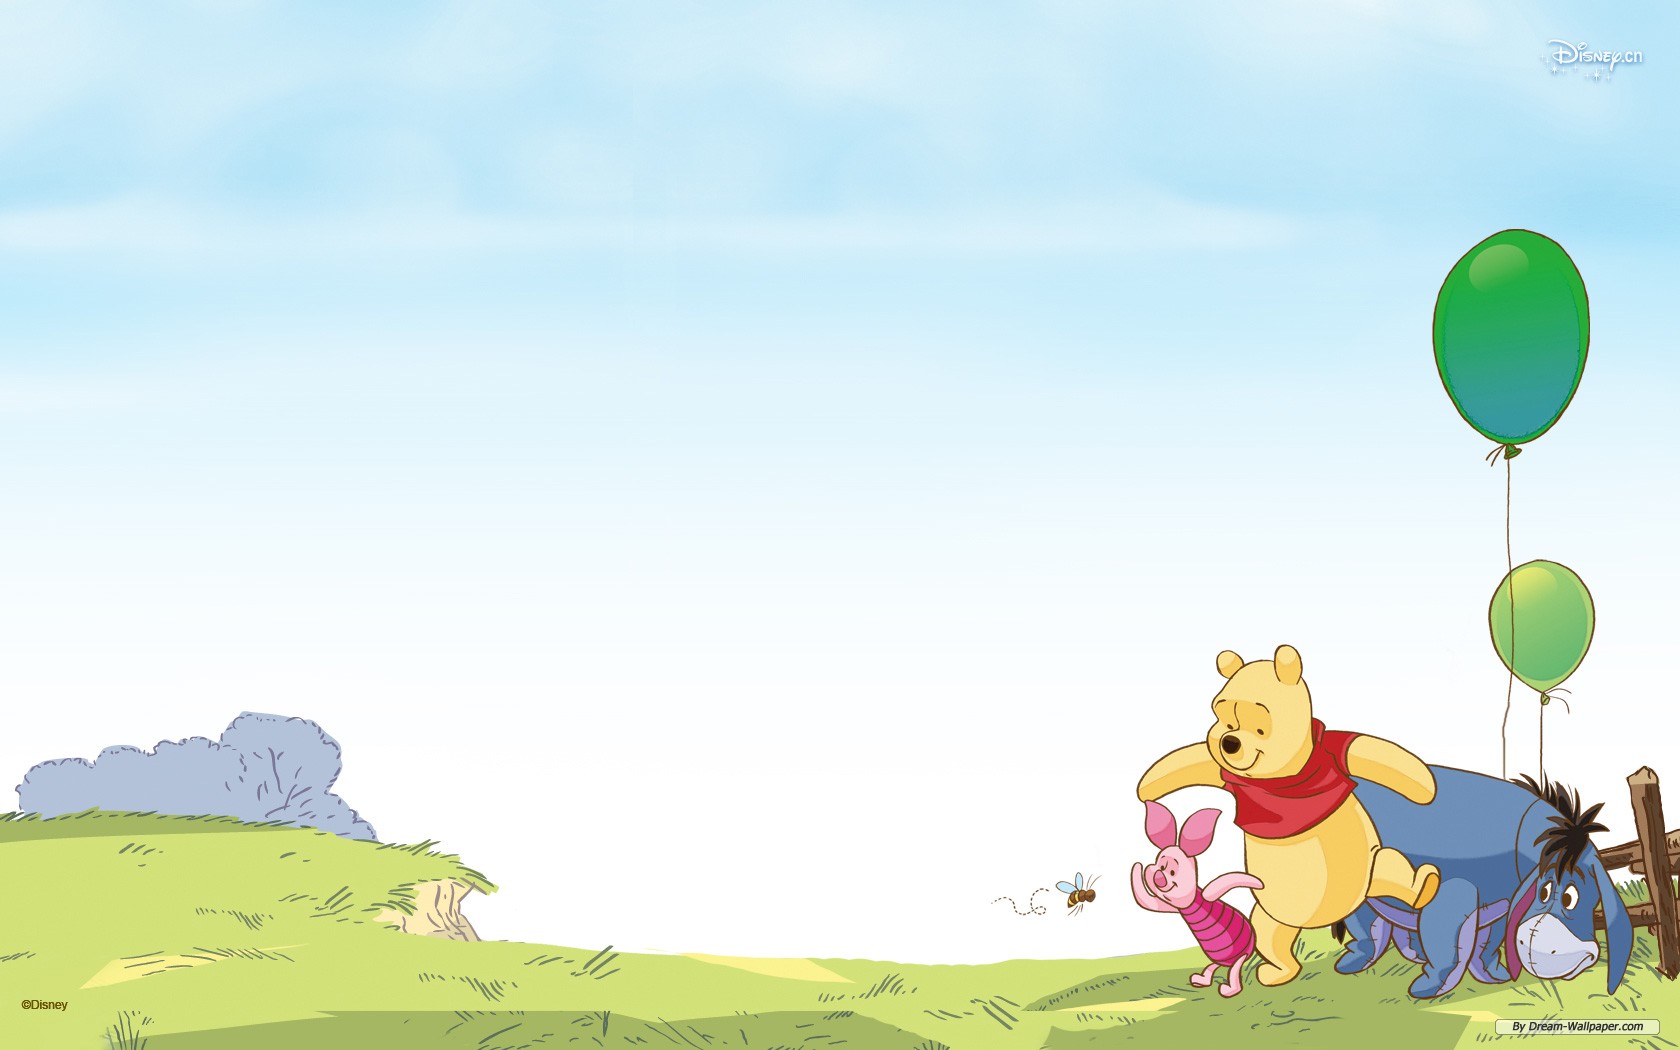 Free Download Wallpaper Winnie The Pooh 1 Wallpaper 1680x1050 Wallpaper Index 1680x1050 For Your Desktop Mobile Tablet Explore 77 Winnie The Pooh Desktop Wallpaper Pooh Wallpapers For Desktop Winnie